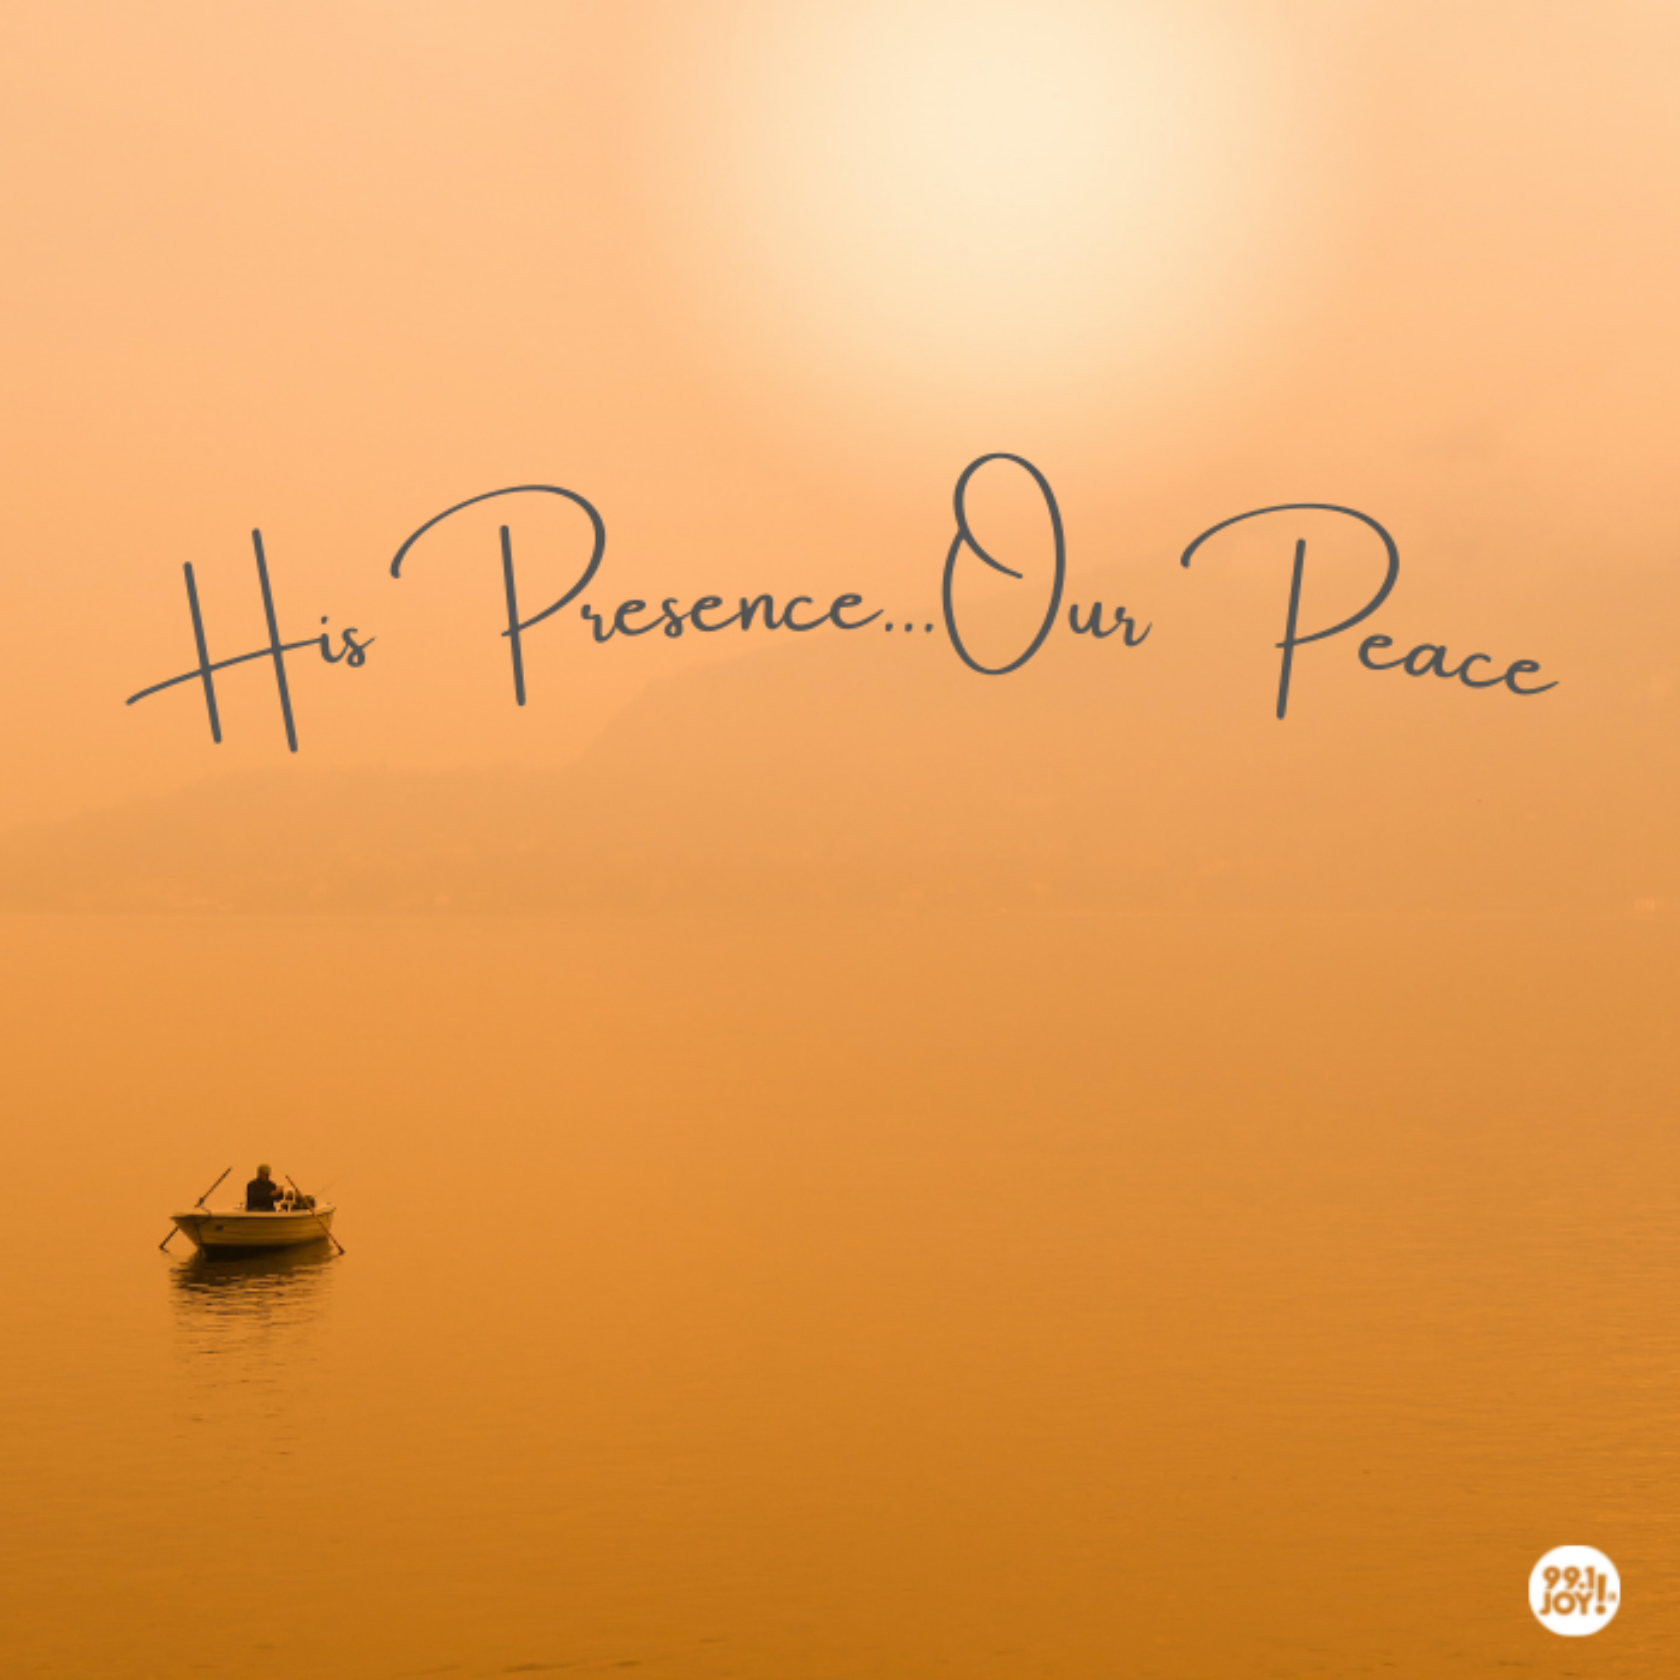 His Presence…Our Peace